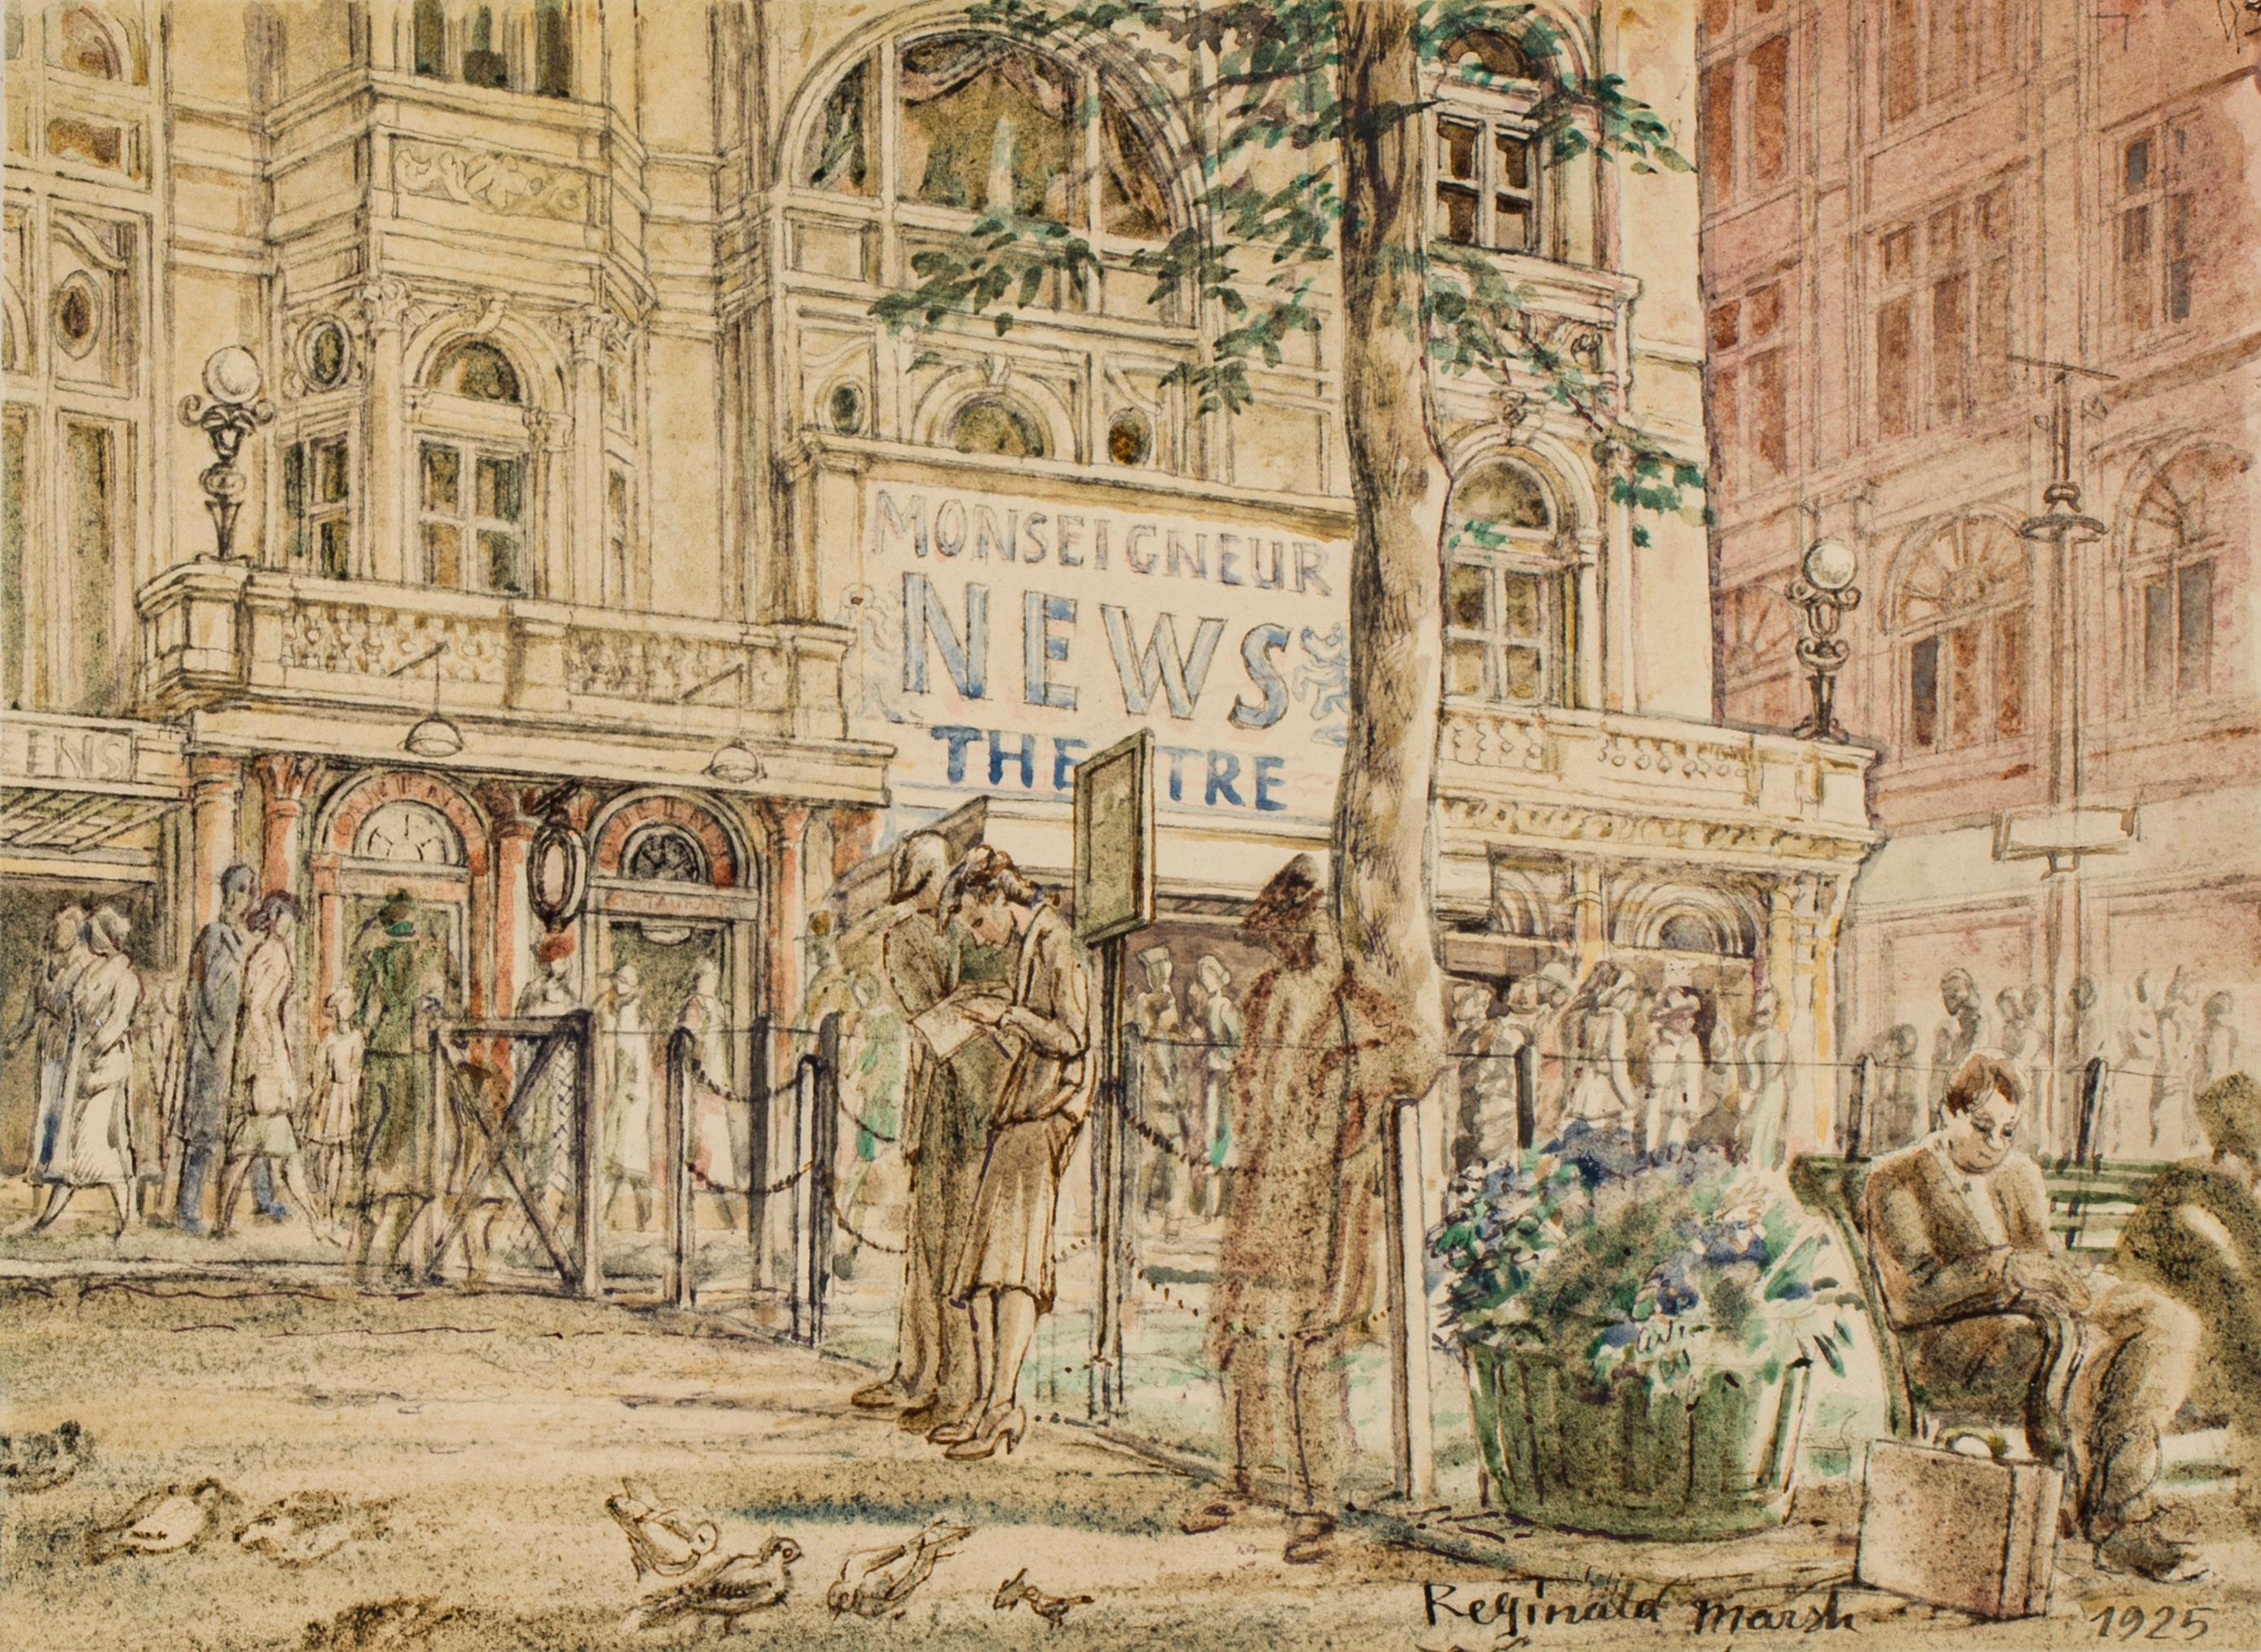 Reginald Marsh, 1898 – 1954
Monseigneur News Theatre, 1925

Signed and dated at lower right: 'Reginald Marsh 1925'

Watercolor on card
8 x 11 inches

Born in Paris to parents who were American artists, Reginald Marsh became an adept illustrator at